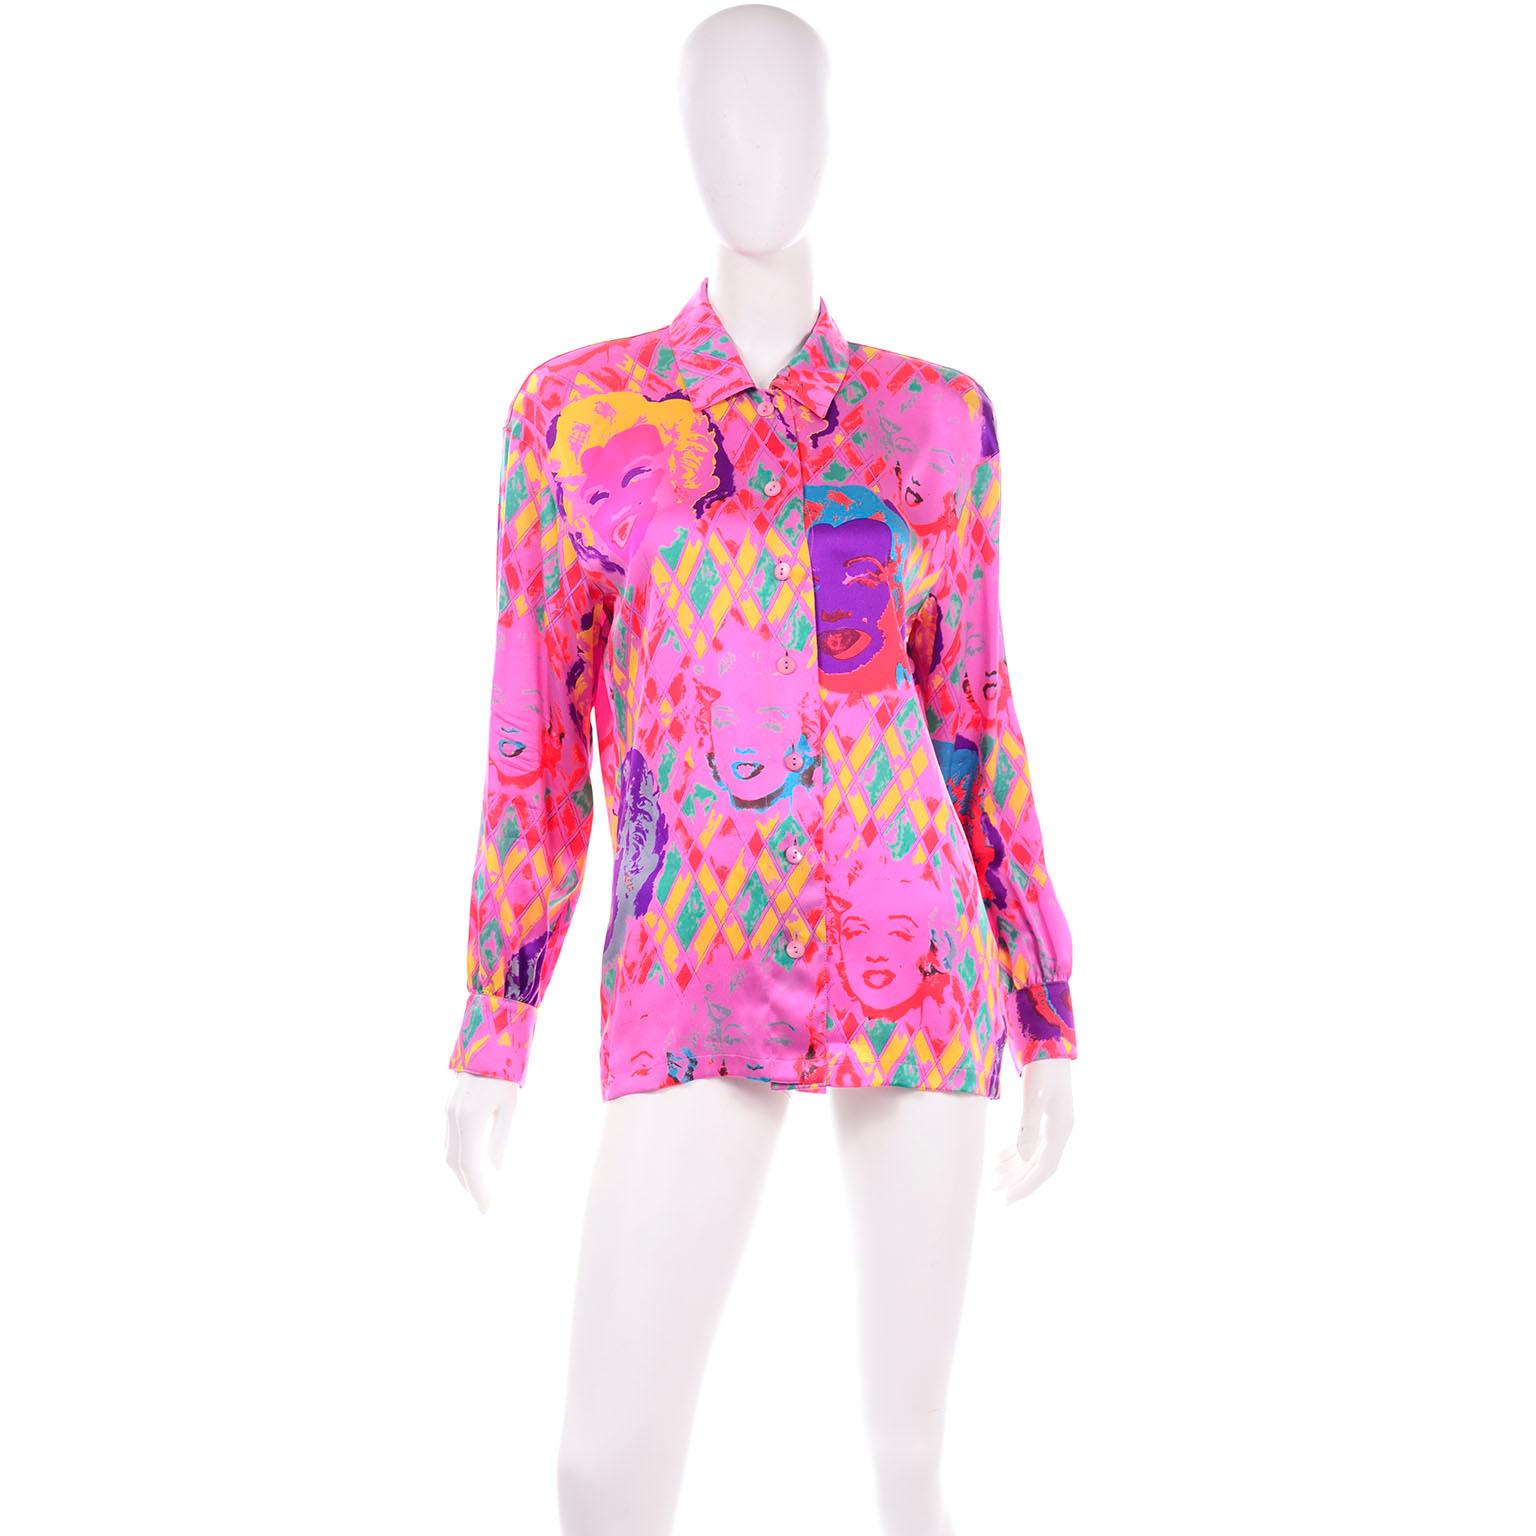 Our favorite of the novelty vintage Margaretha Ley Escada blouses! This vintage pink silk blouse has images of Andy Warhol style Marilyn Monroe scattered throughout. We love Escada's take on 1980's silk printed blouses, but we are especially excited